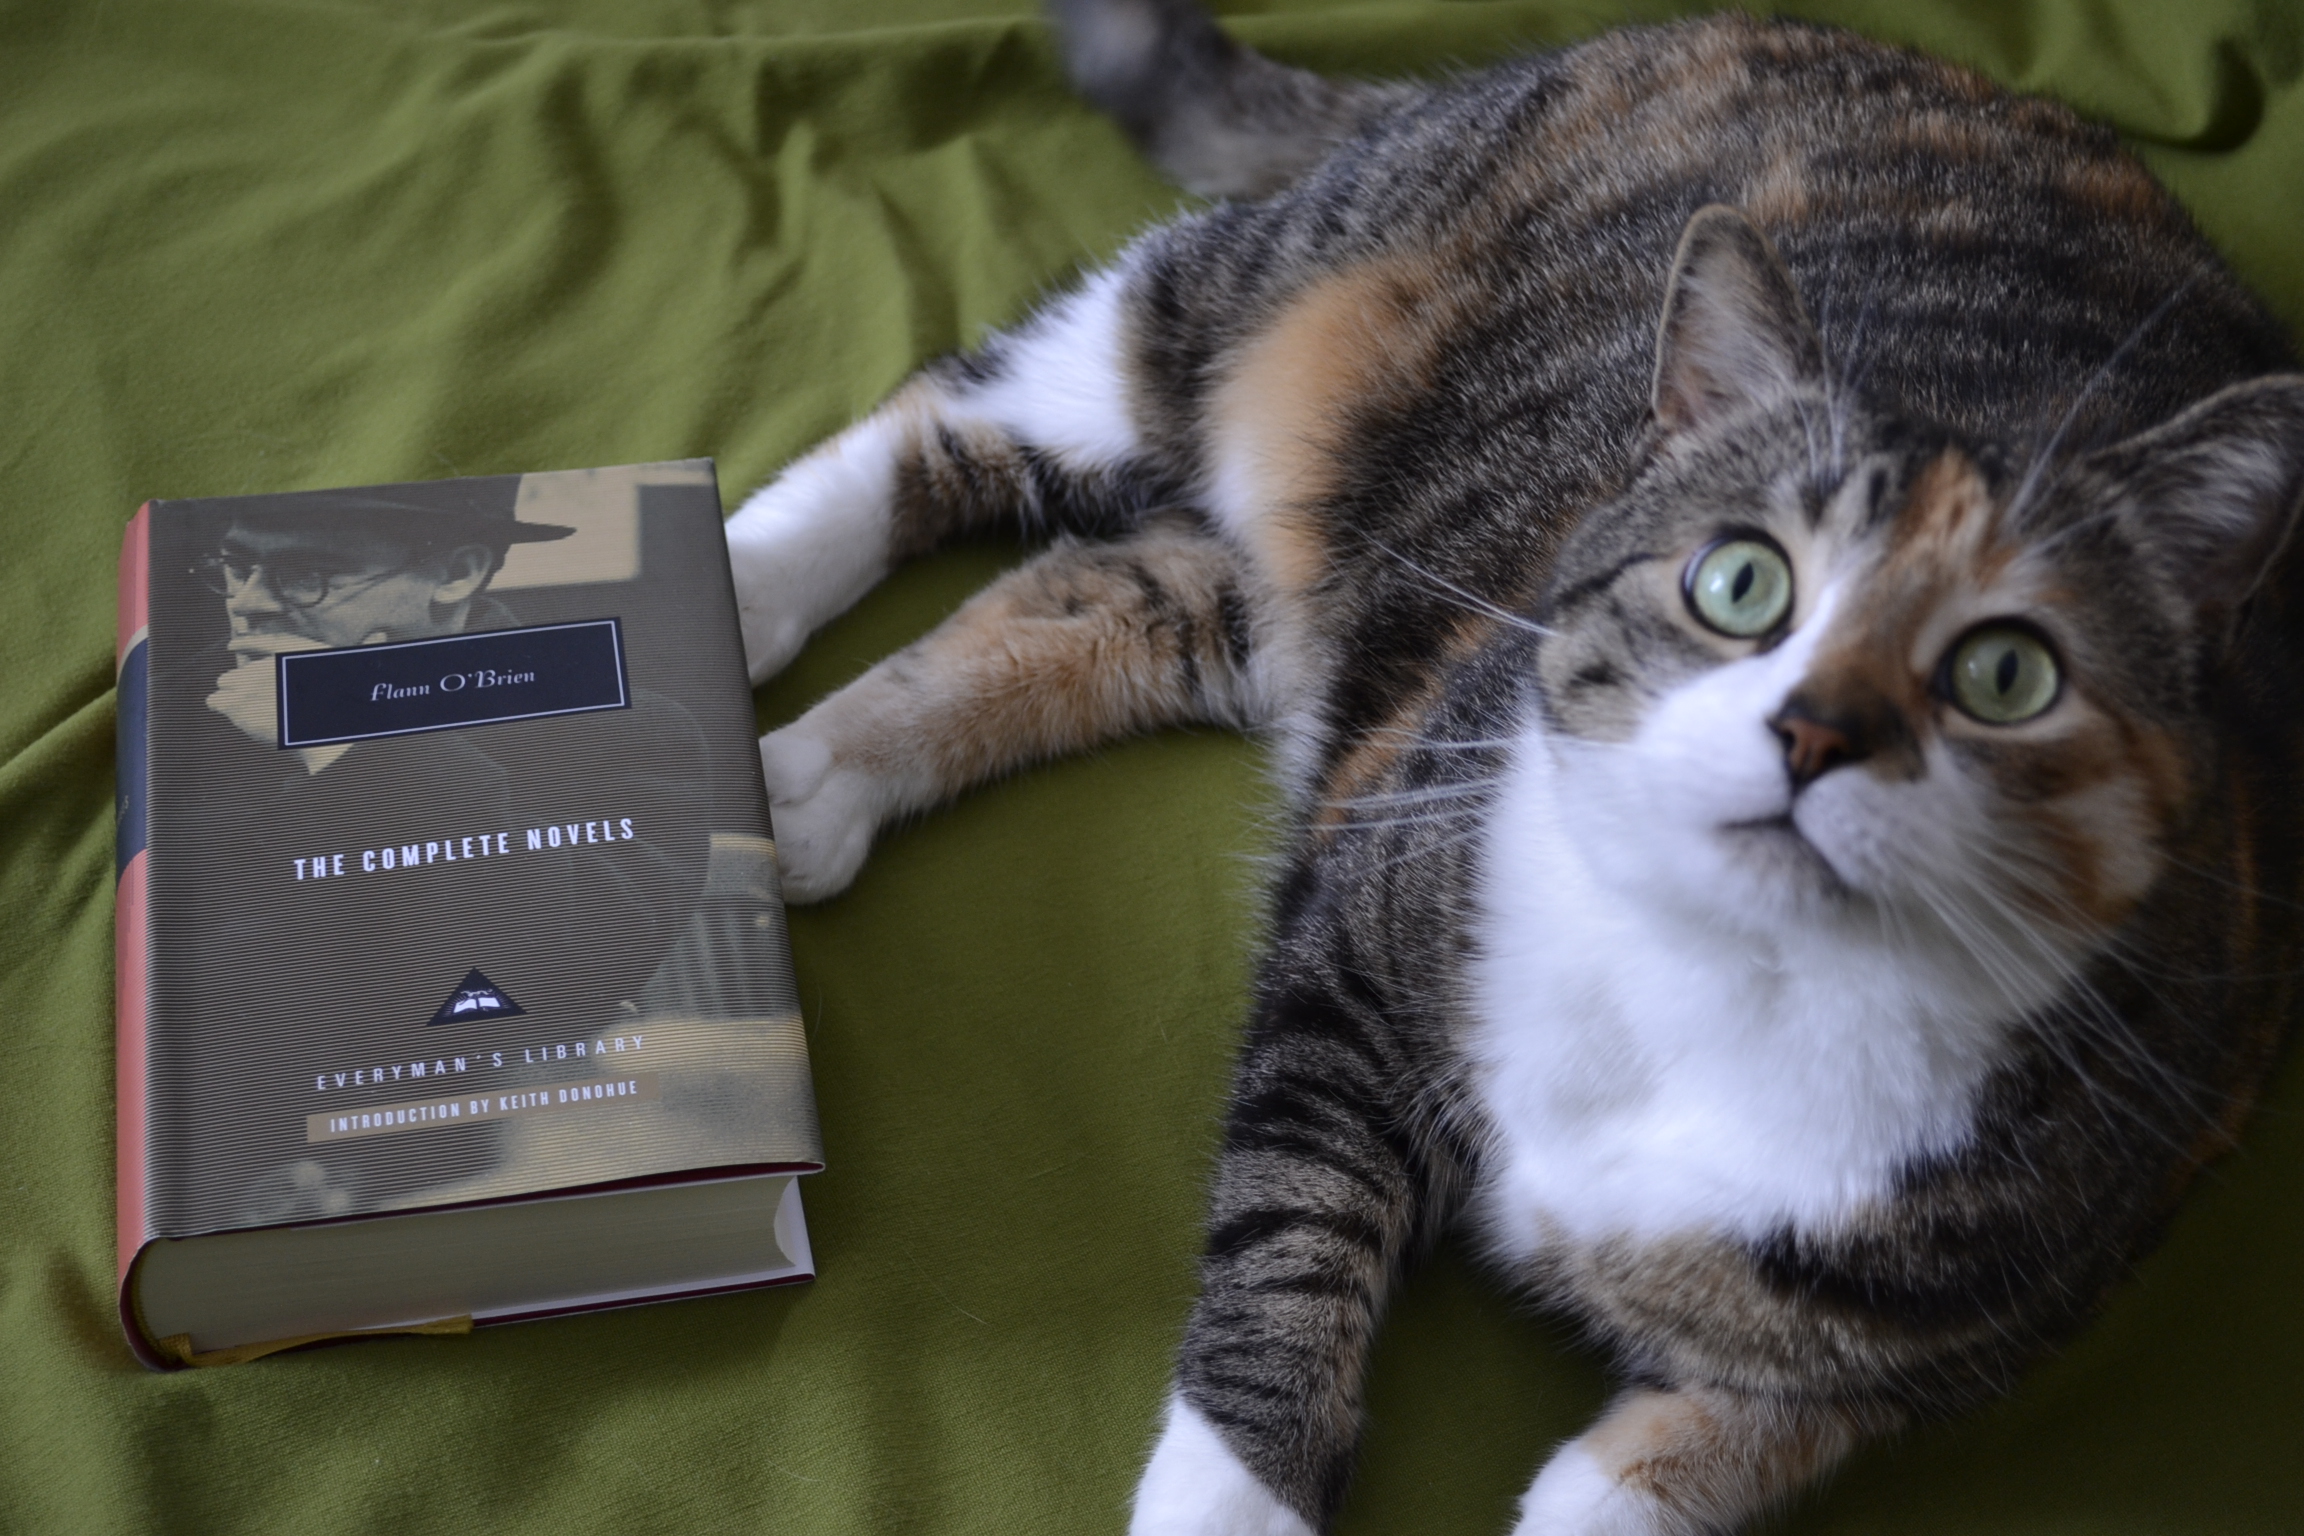 A calico tabby sits beside a book whose cover features a man in thought and the words 'Flann O'Brien'.